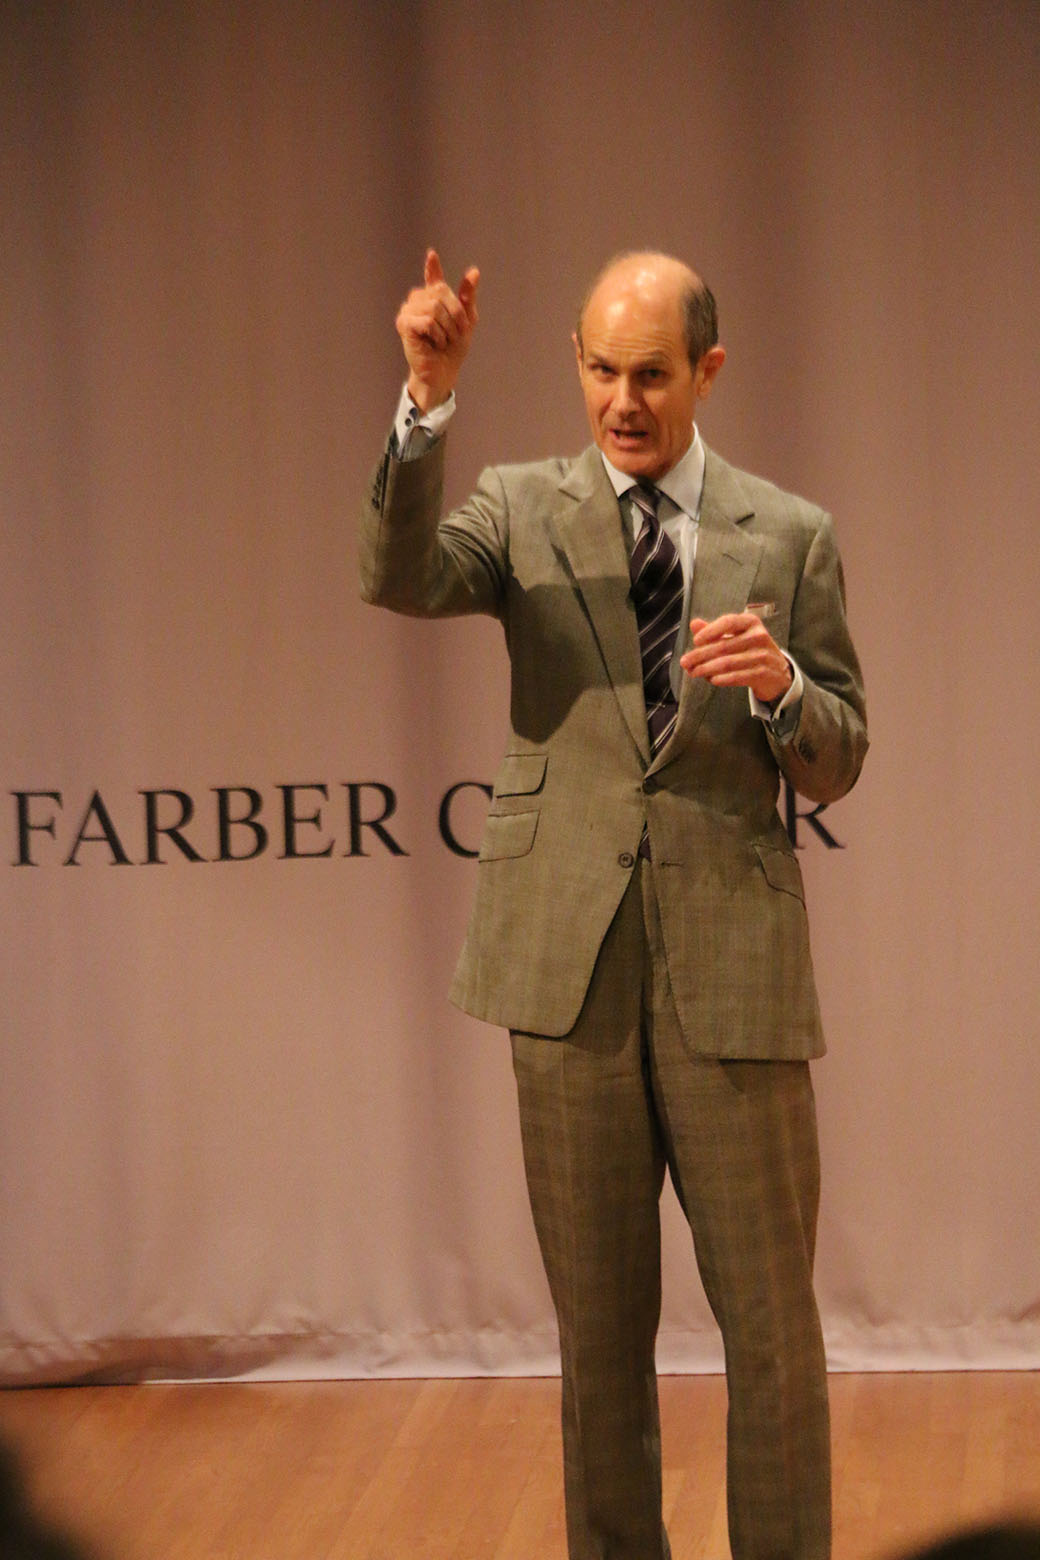 Fortune magazine editor speaks at Farber Hall about liberal arts